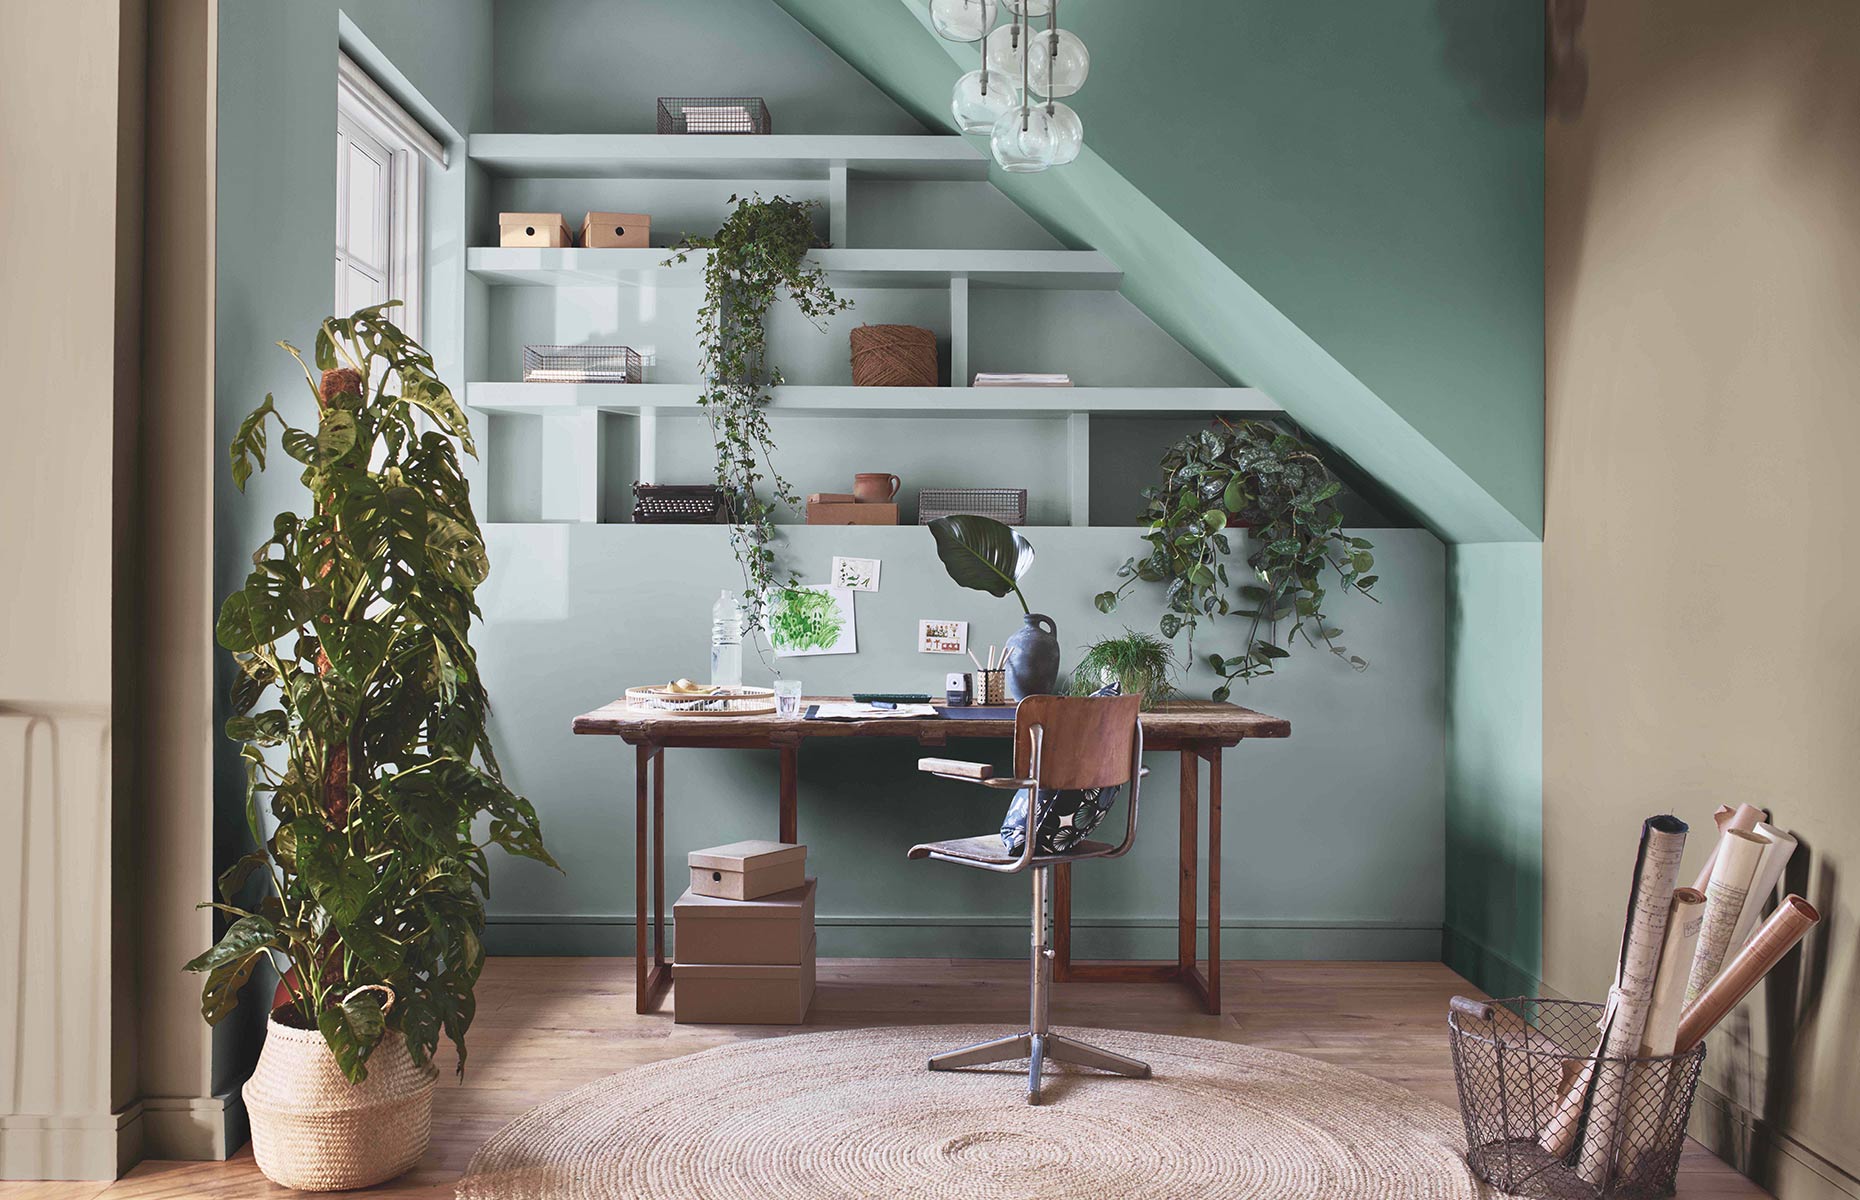 Paired with soft green, the COTY 2021 is perfect for creating focused work spaces.